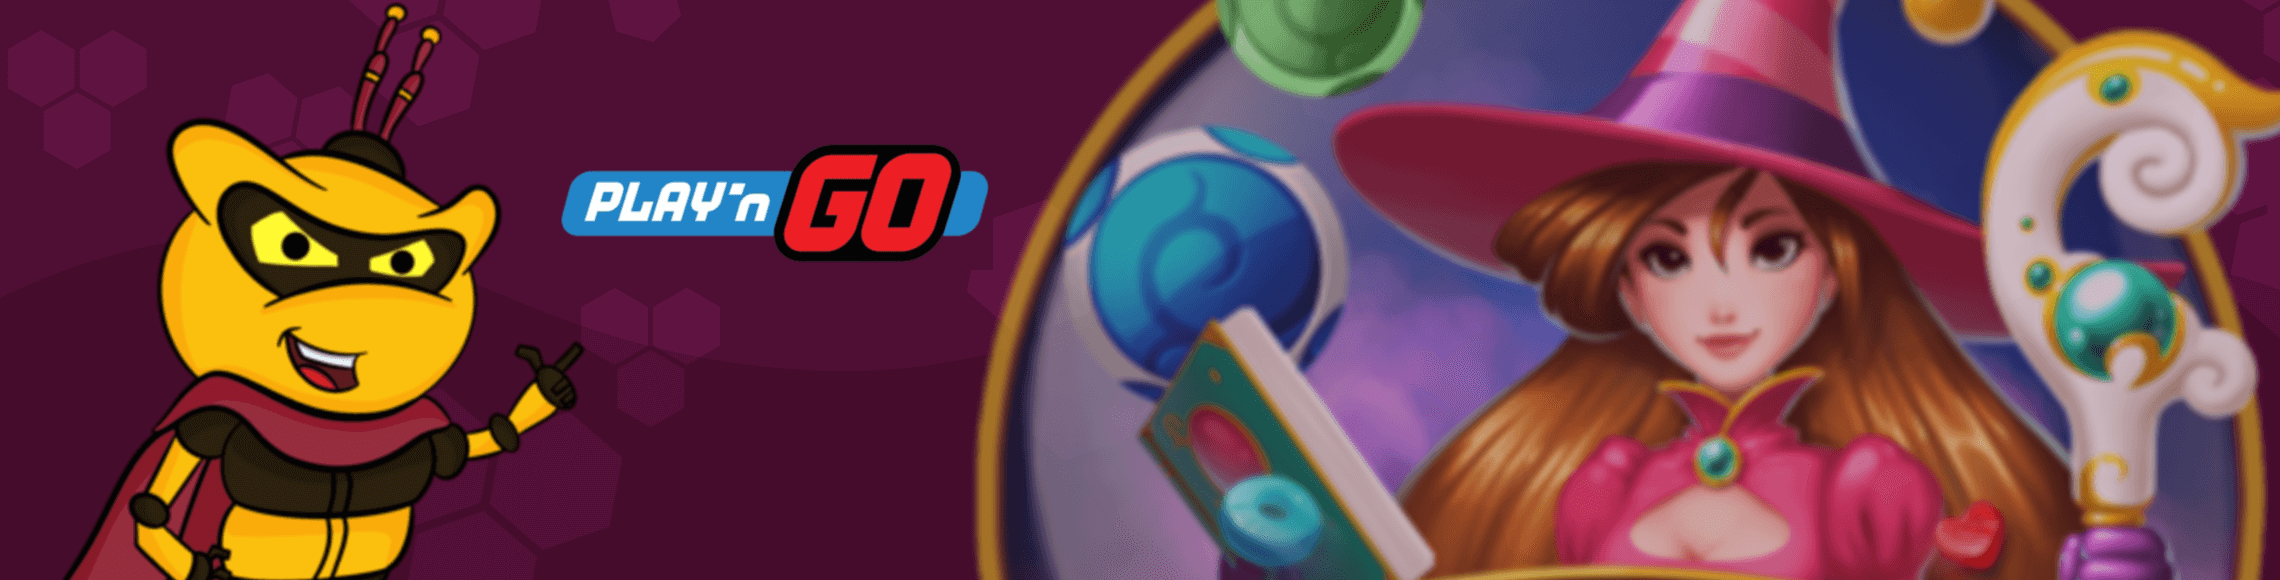 Top Play’n GO Casino Games